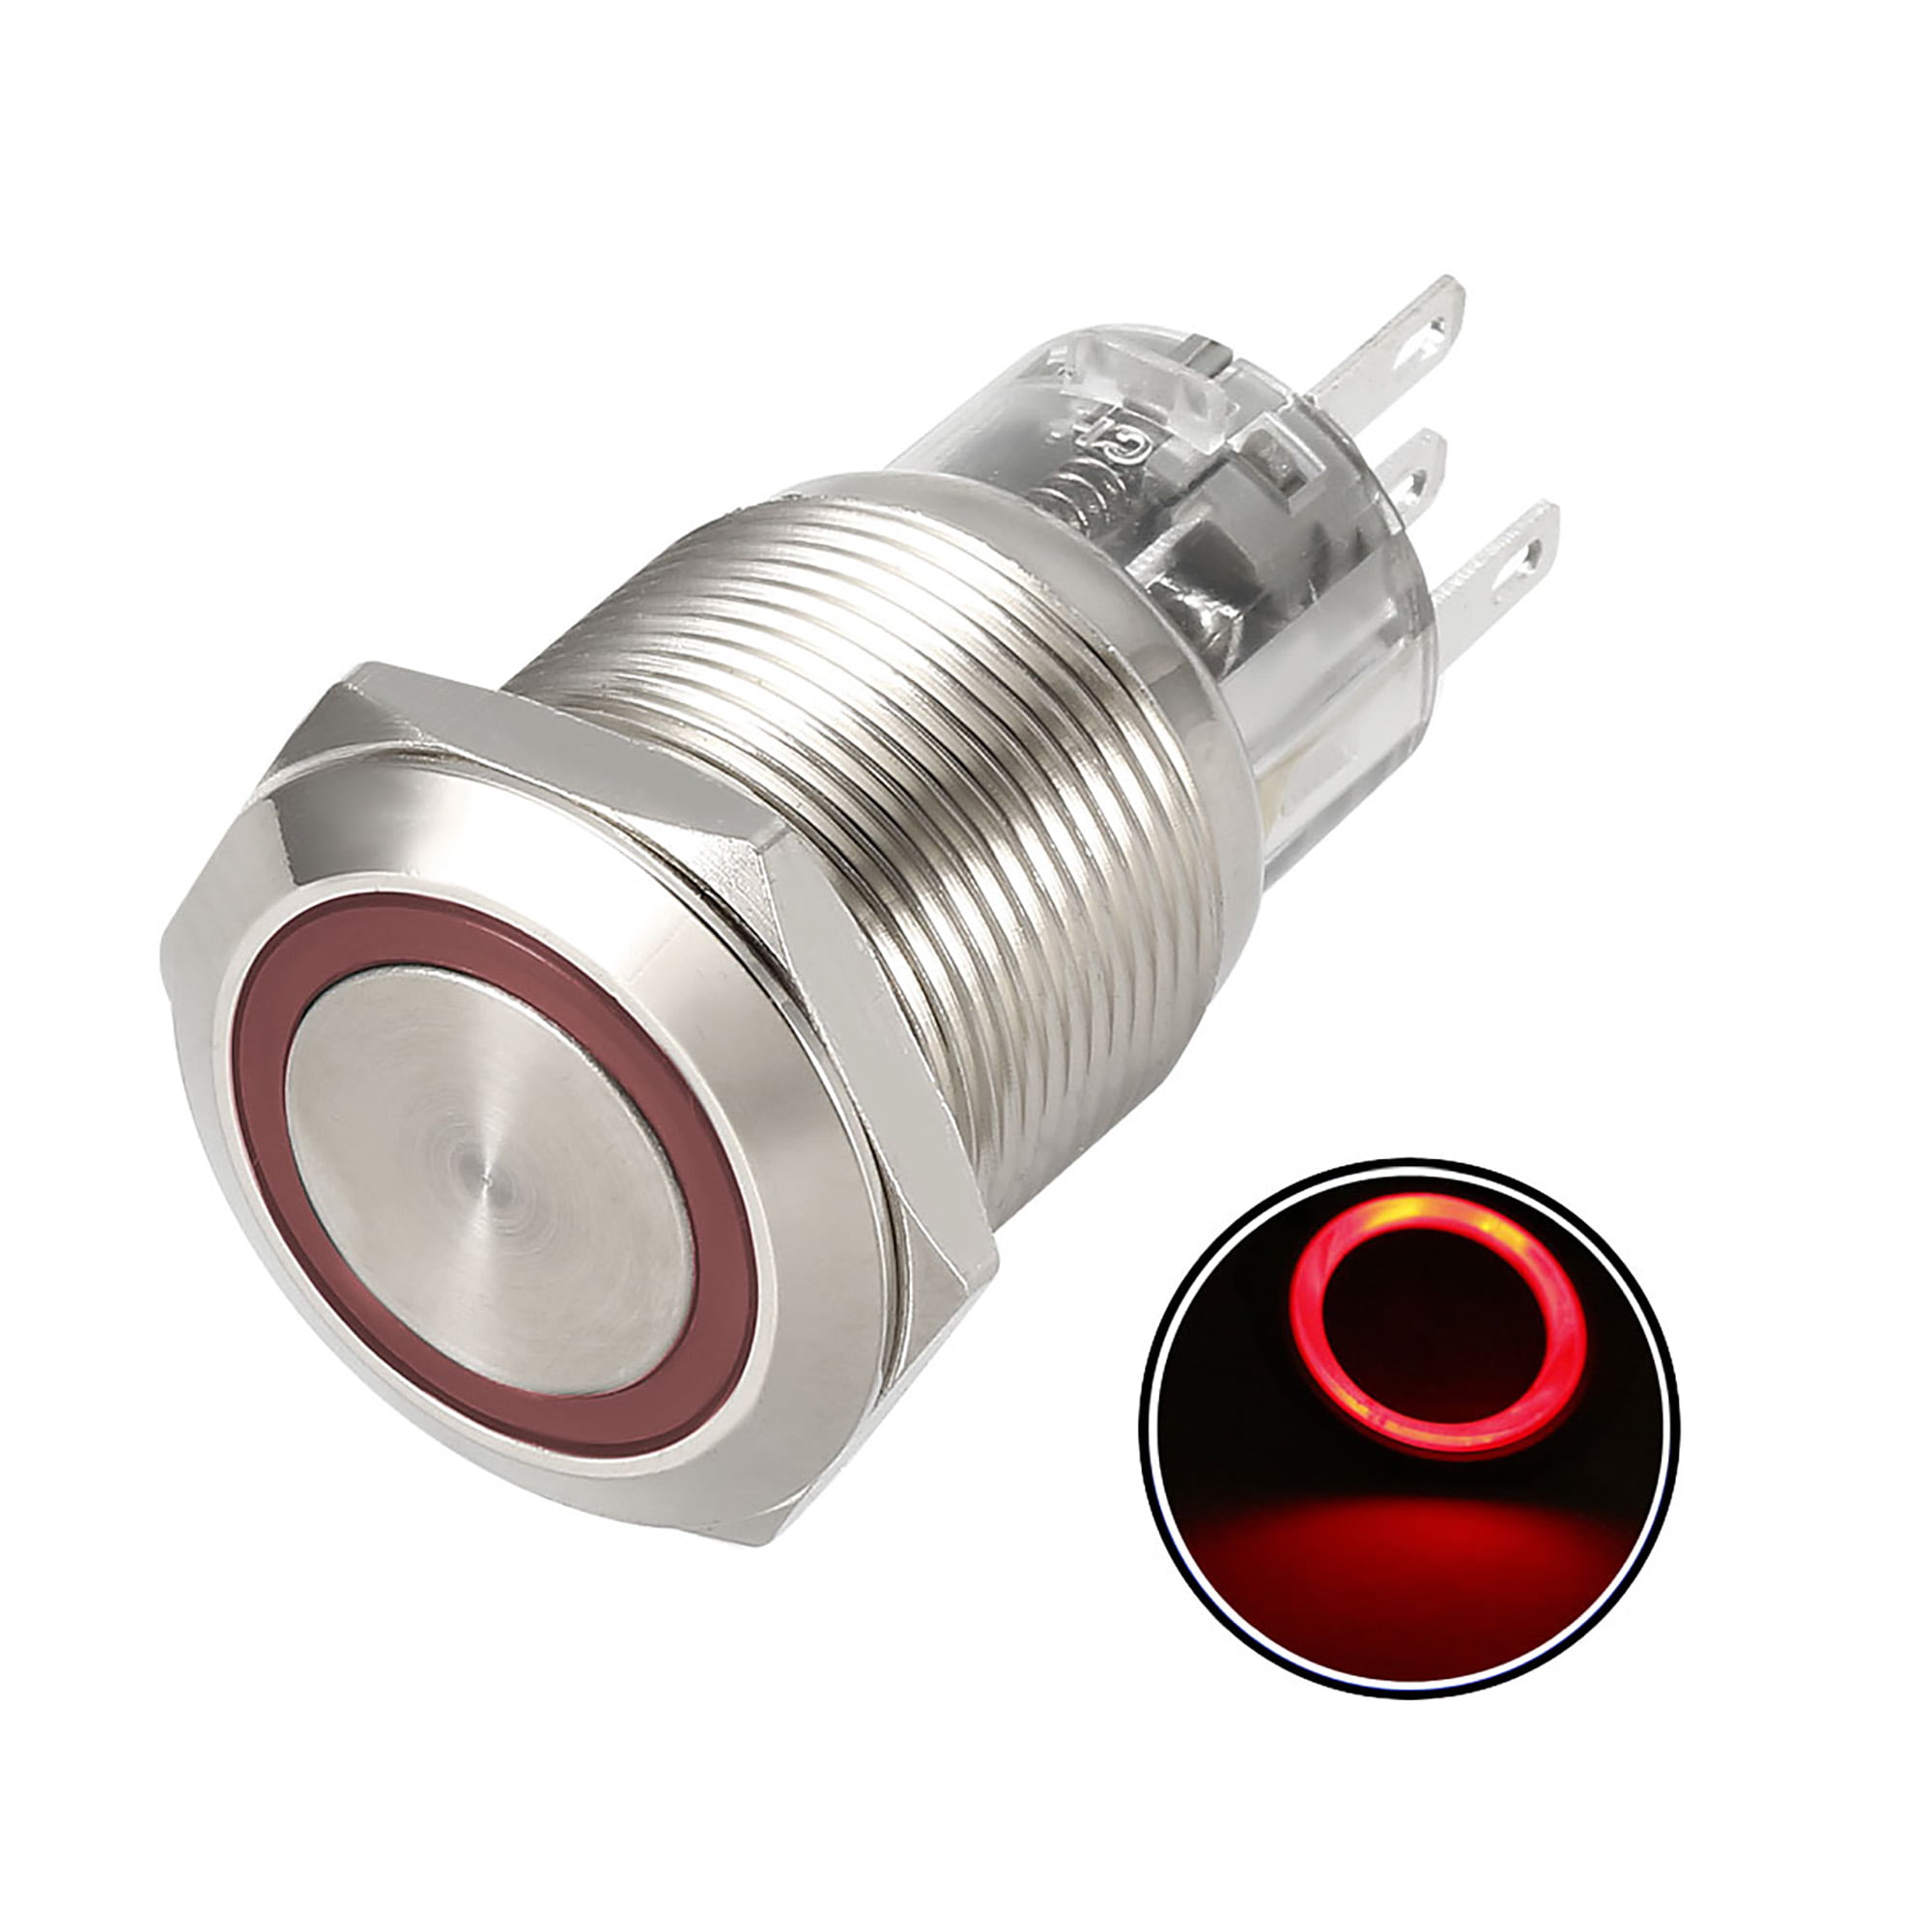 Details about   Momentary Metal Push Button Switch 19mm Mounting 1NO 1NC COM 12V Red LED Light 